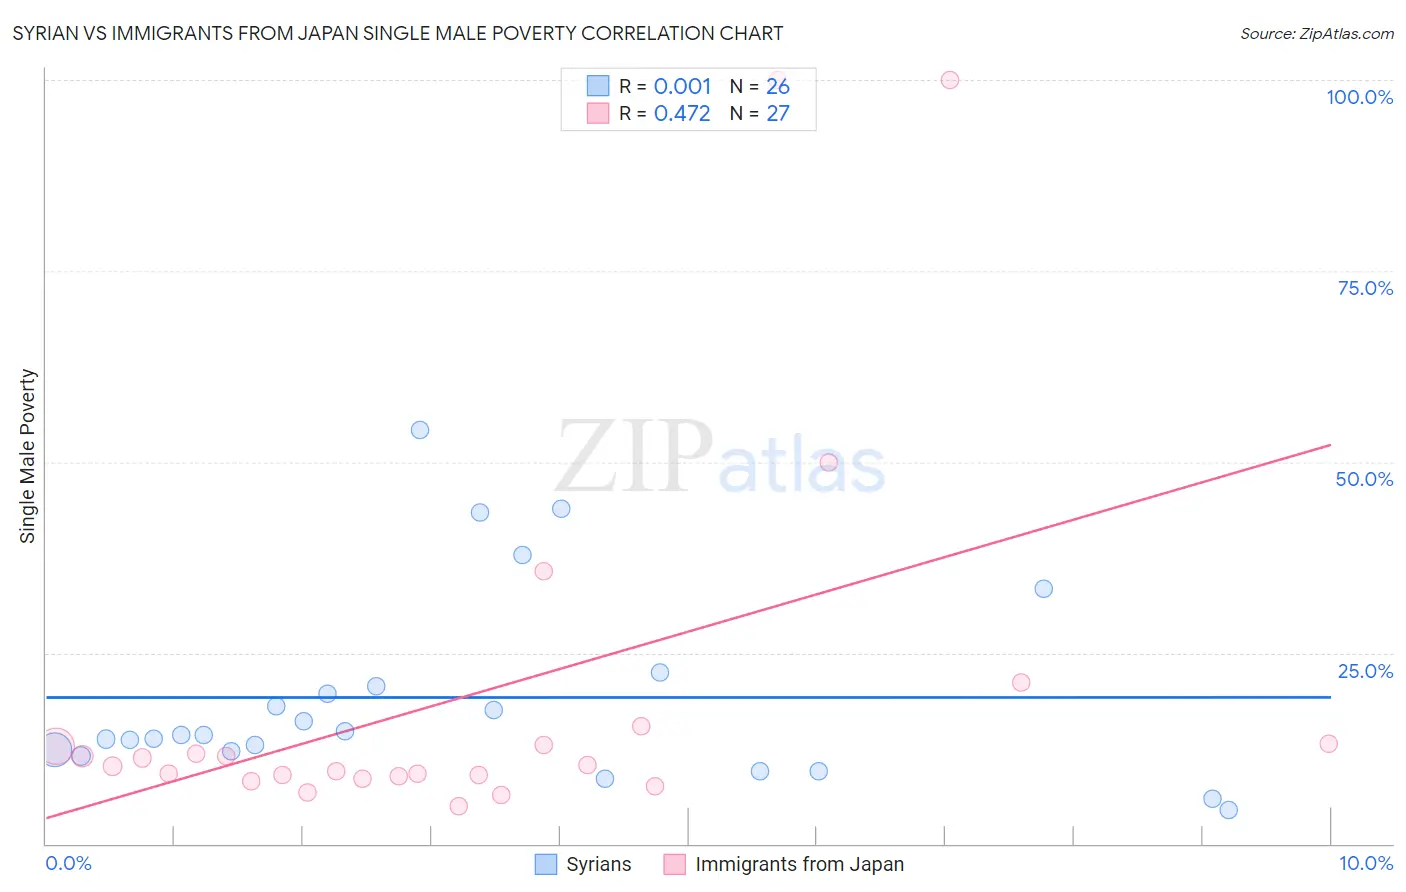 Syrian vs Immigrants from Japan Single Male Poverty